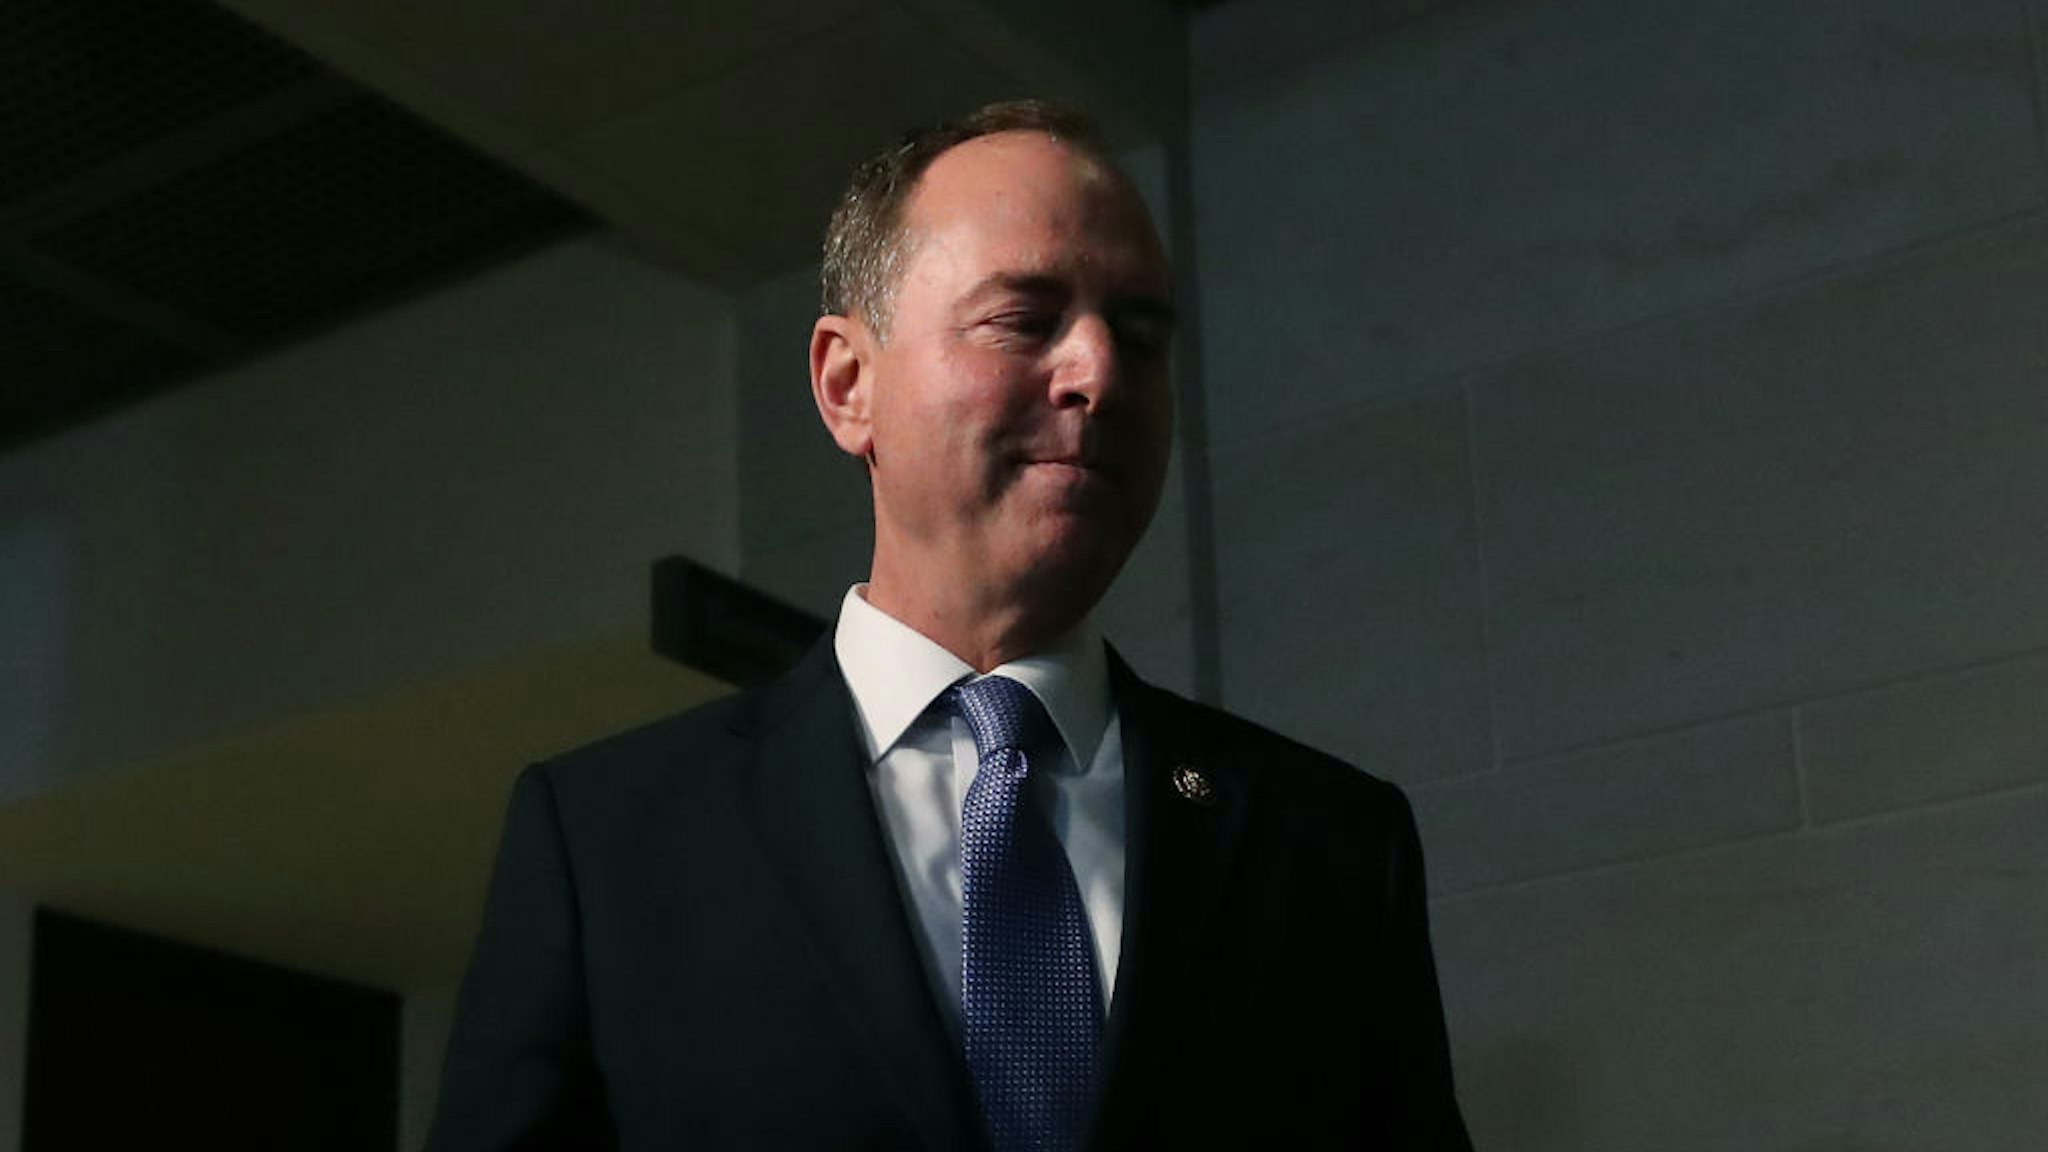 House Intelligence Committee Chairman Adam Schiff (D-CA) speaks to the media after attending a closed door meeting where former US Special Envoy for Ukraine¬†Kurt Volker¬†was being interviewed at the U.S. Capitol October 03, 2019 in Washington, DC. Volker is the first official to testify on the¬†whistleblowers charges that President Donald Trump tried to pressure Ukraine to investigate his Democratic rival Joe Biden. (Photo by Mark Wilson/Getty Images)